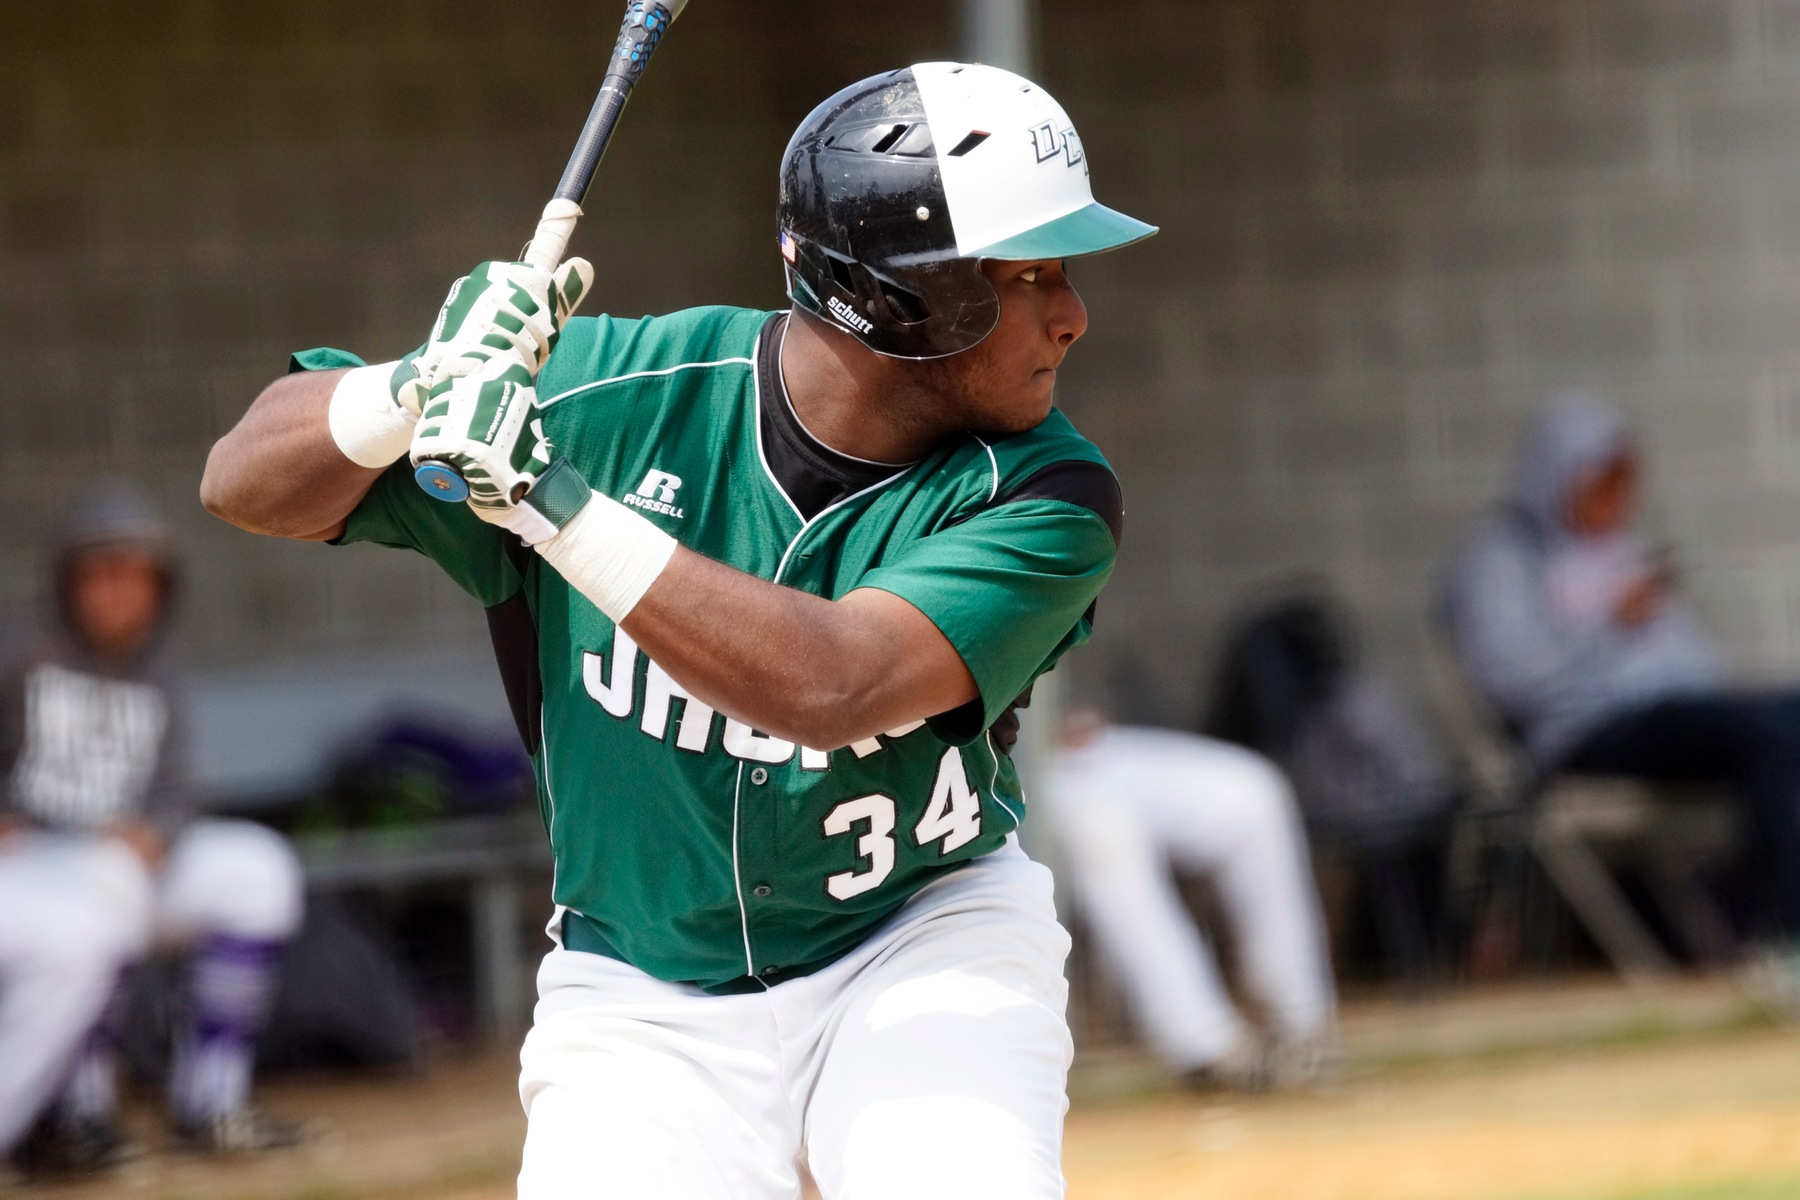 Victor Terrero has hit 3 home runs over the last two weekends.